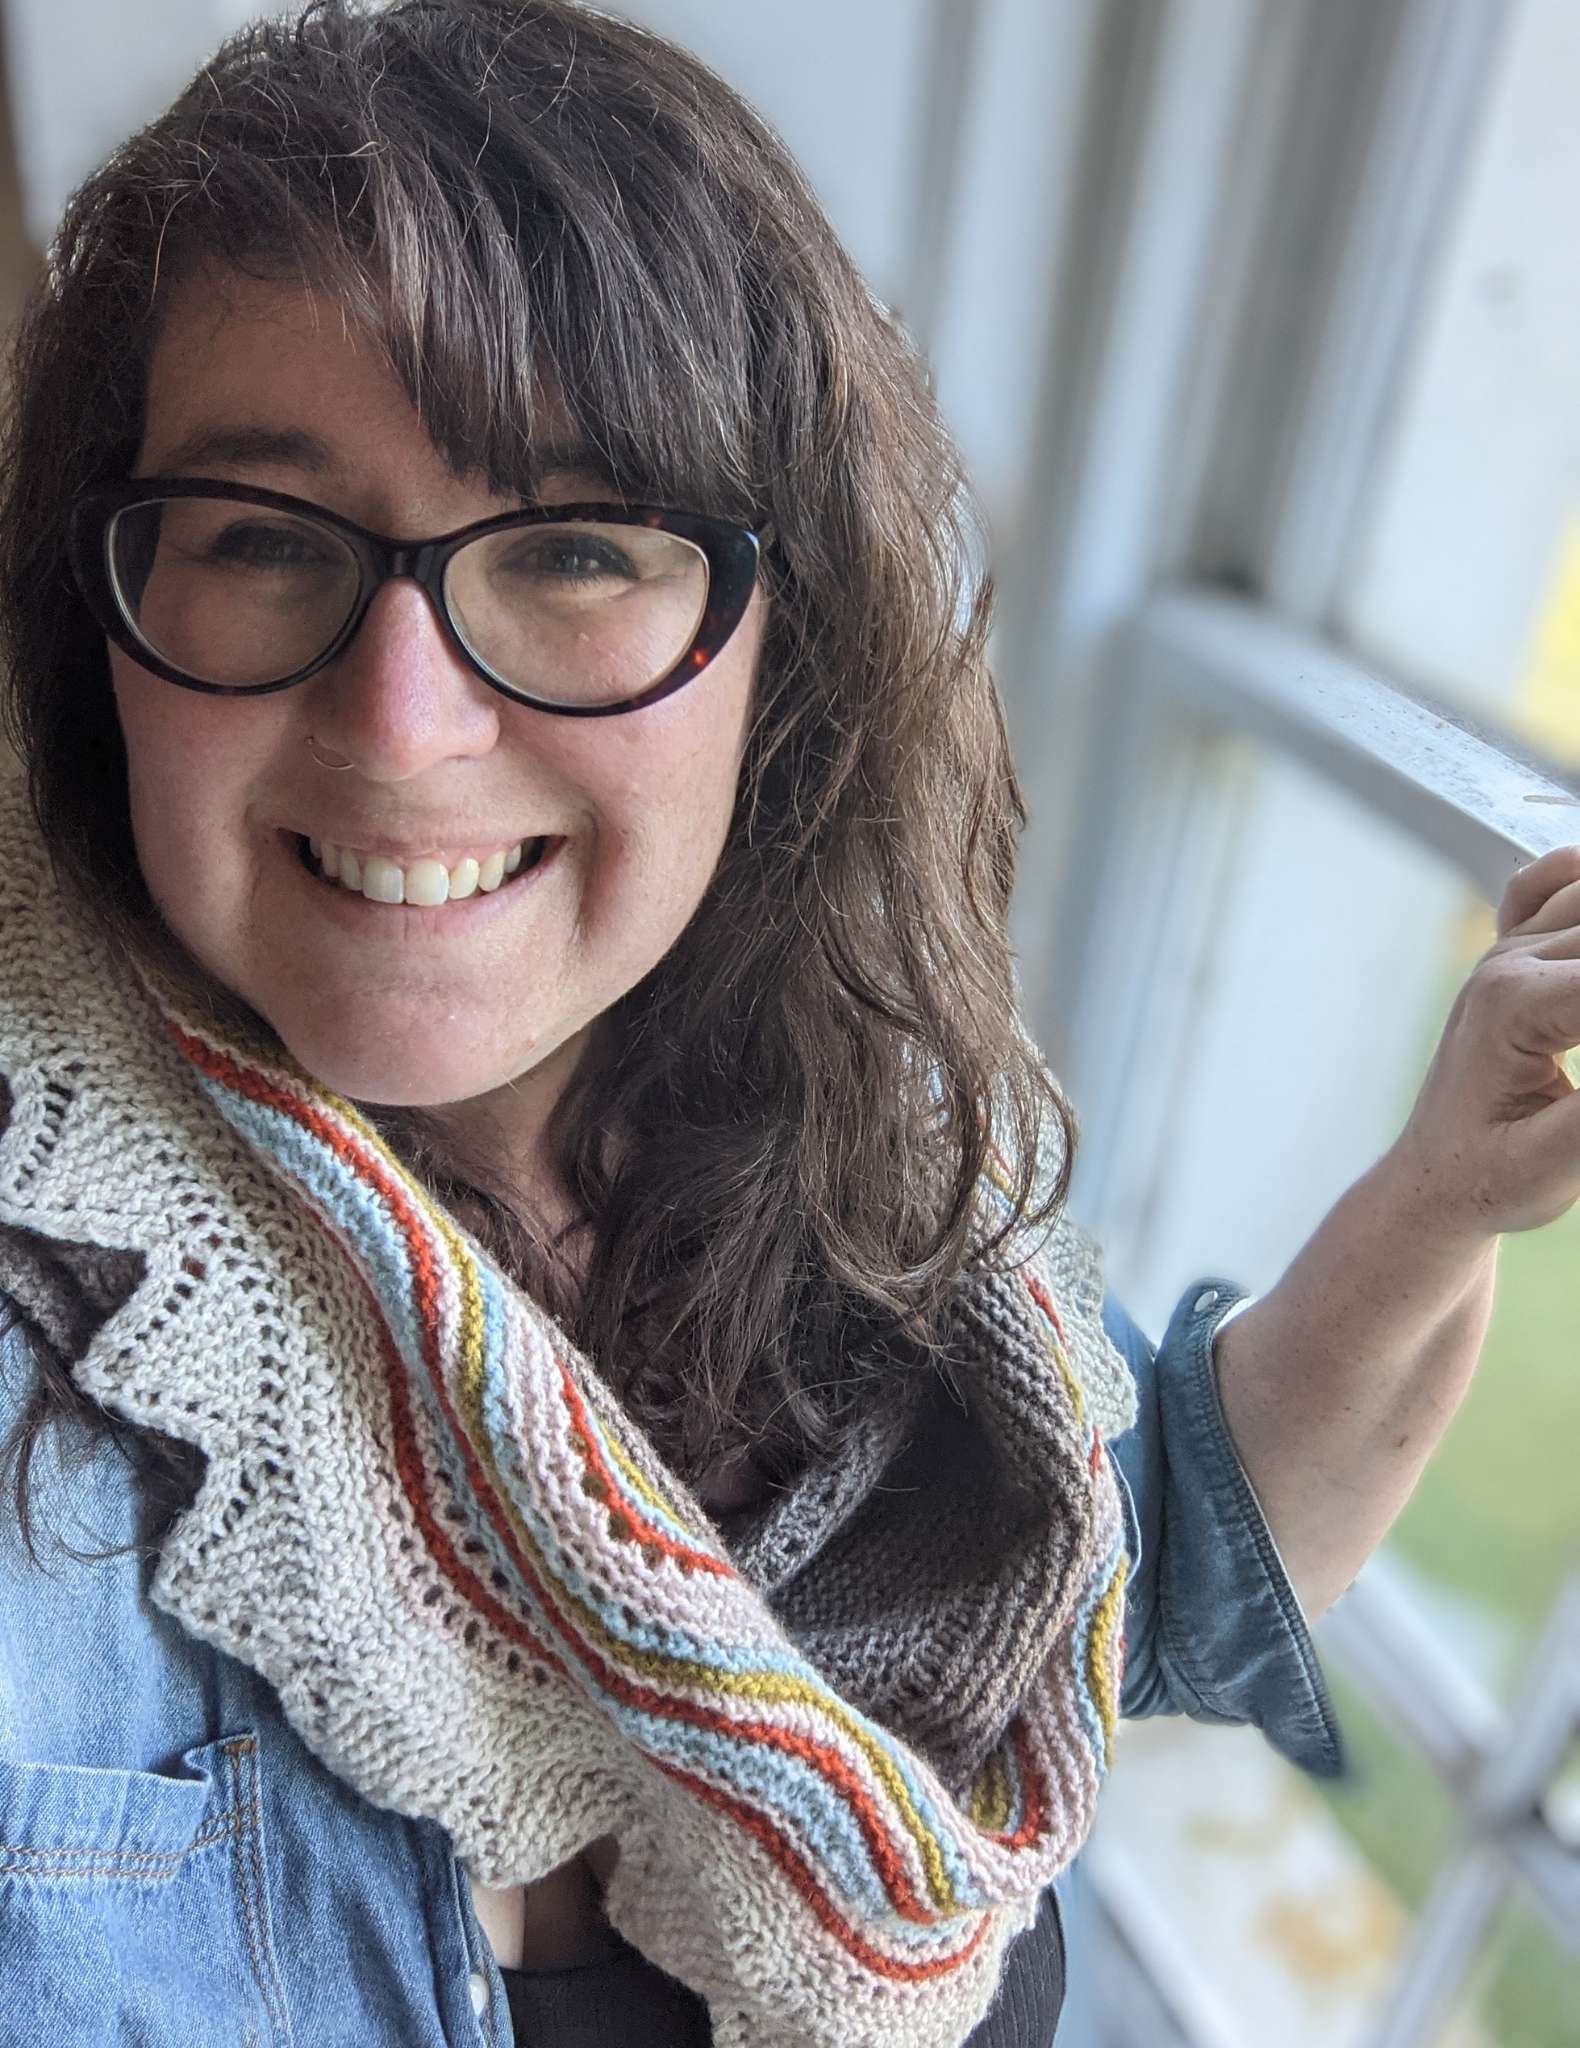 A white woman with long wavy hair and glasses stands indoors in front of a window. She is smiling and wears a neutral shawl with brightly coloured stripes and a blue shirt.